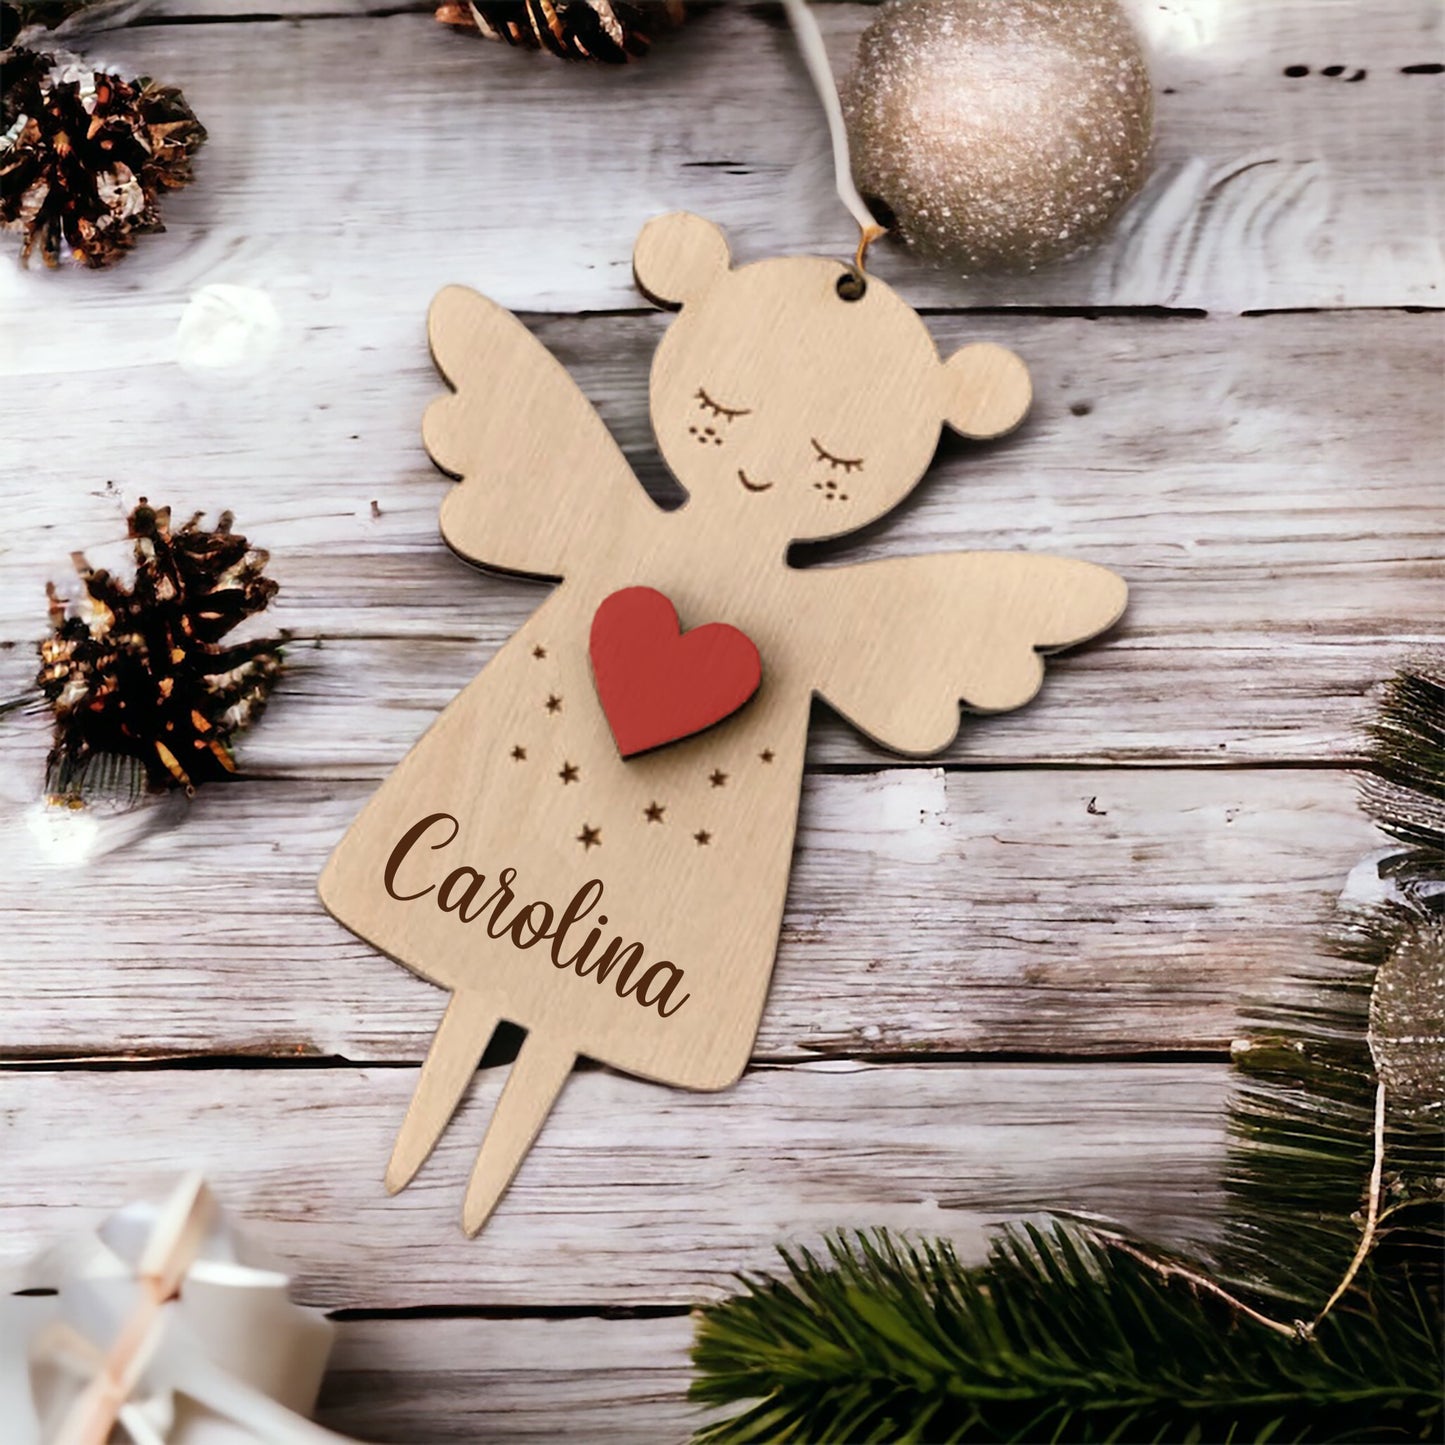 Wooden Angel Girl Christmas Ornament with Name Engraved - Free Shipping